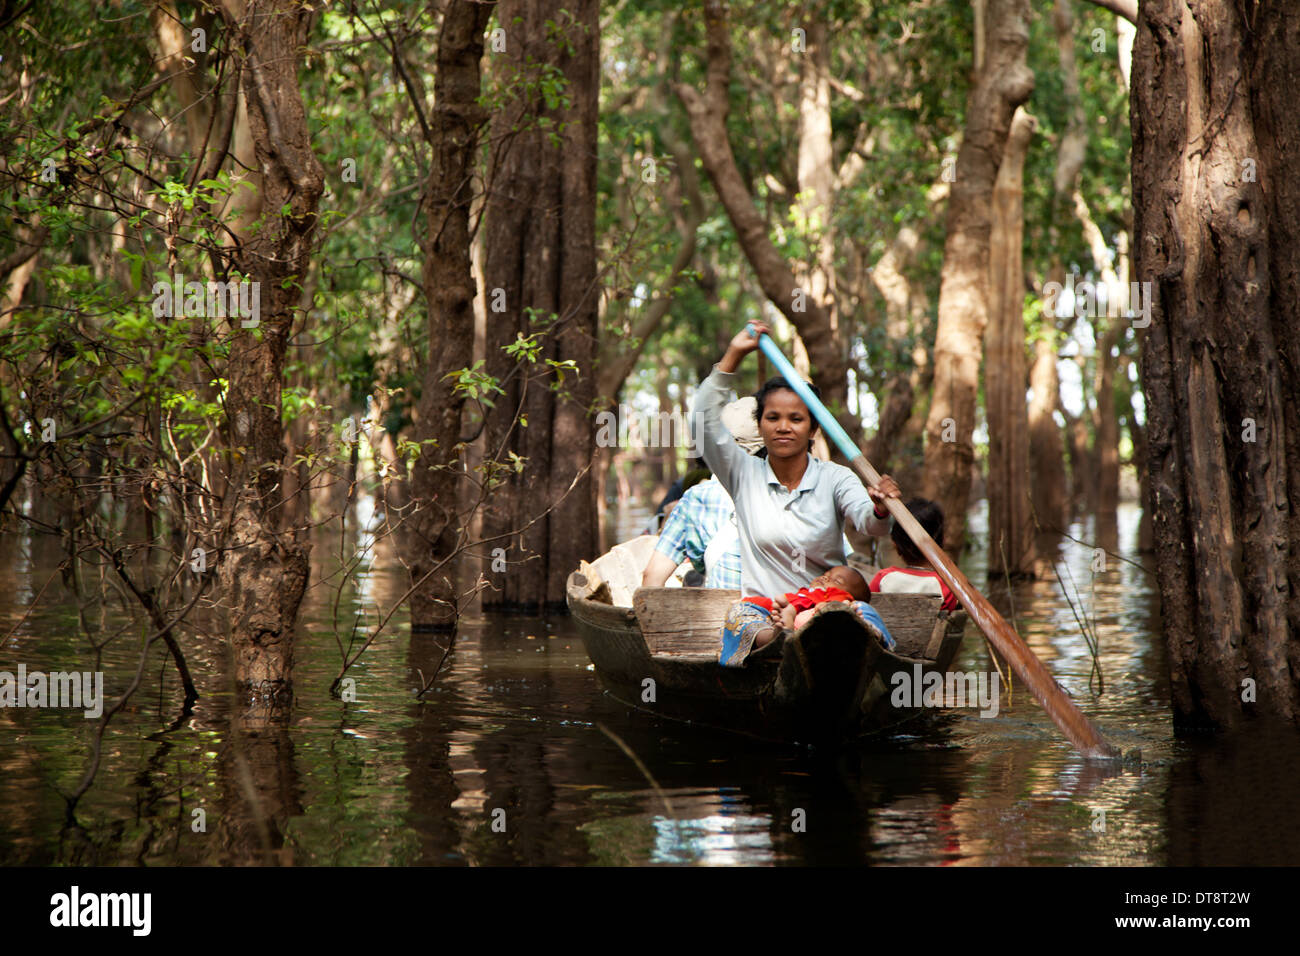 Boat in flooded forest Stock Photo